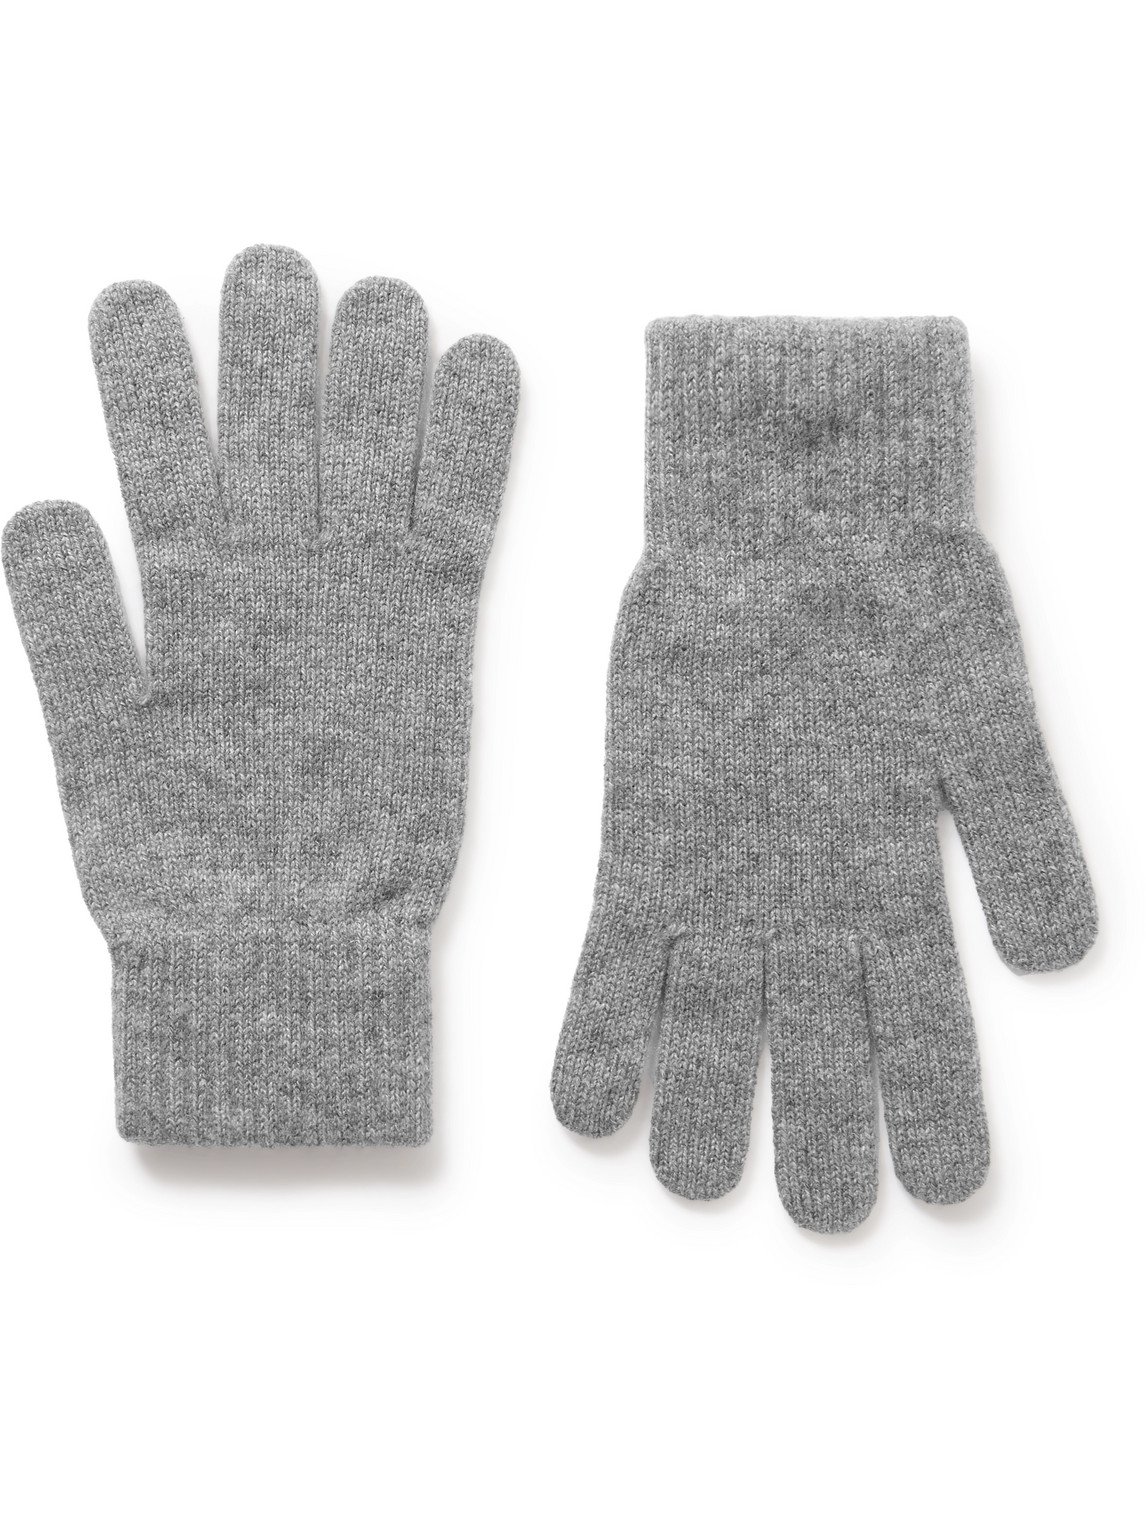 Anderson & Sheppard Cashmere Gloves In Gray